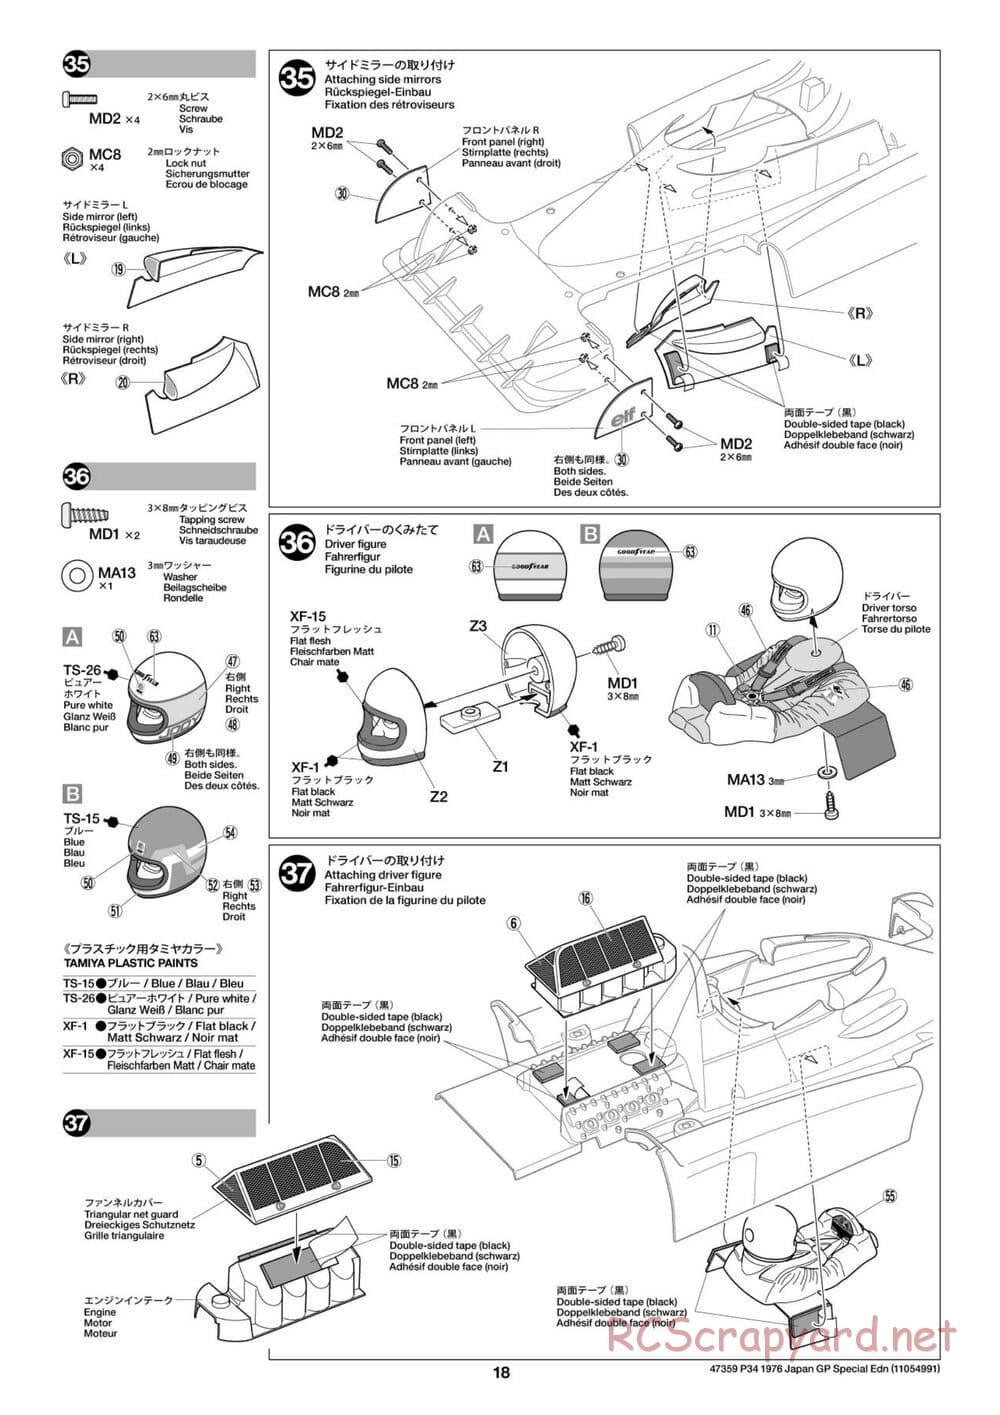 Tamiya - Tyrrell P34 1976 Japan Grand Prix Special - F103-6W Chassis - Manual - Page 18